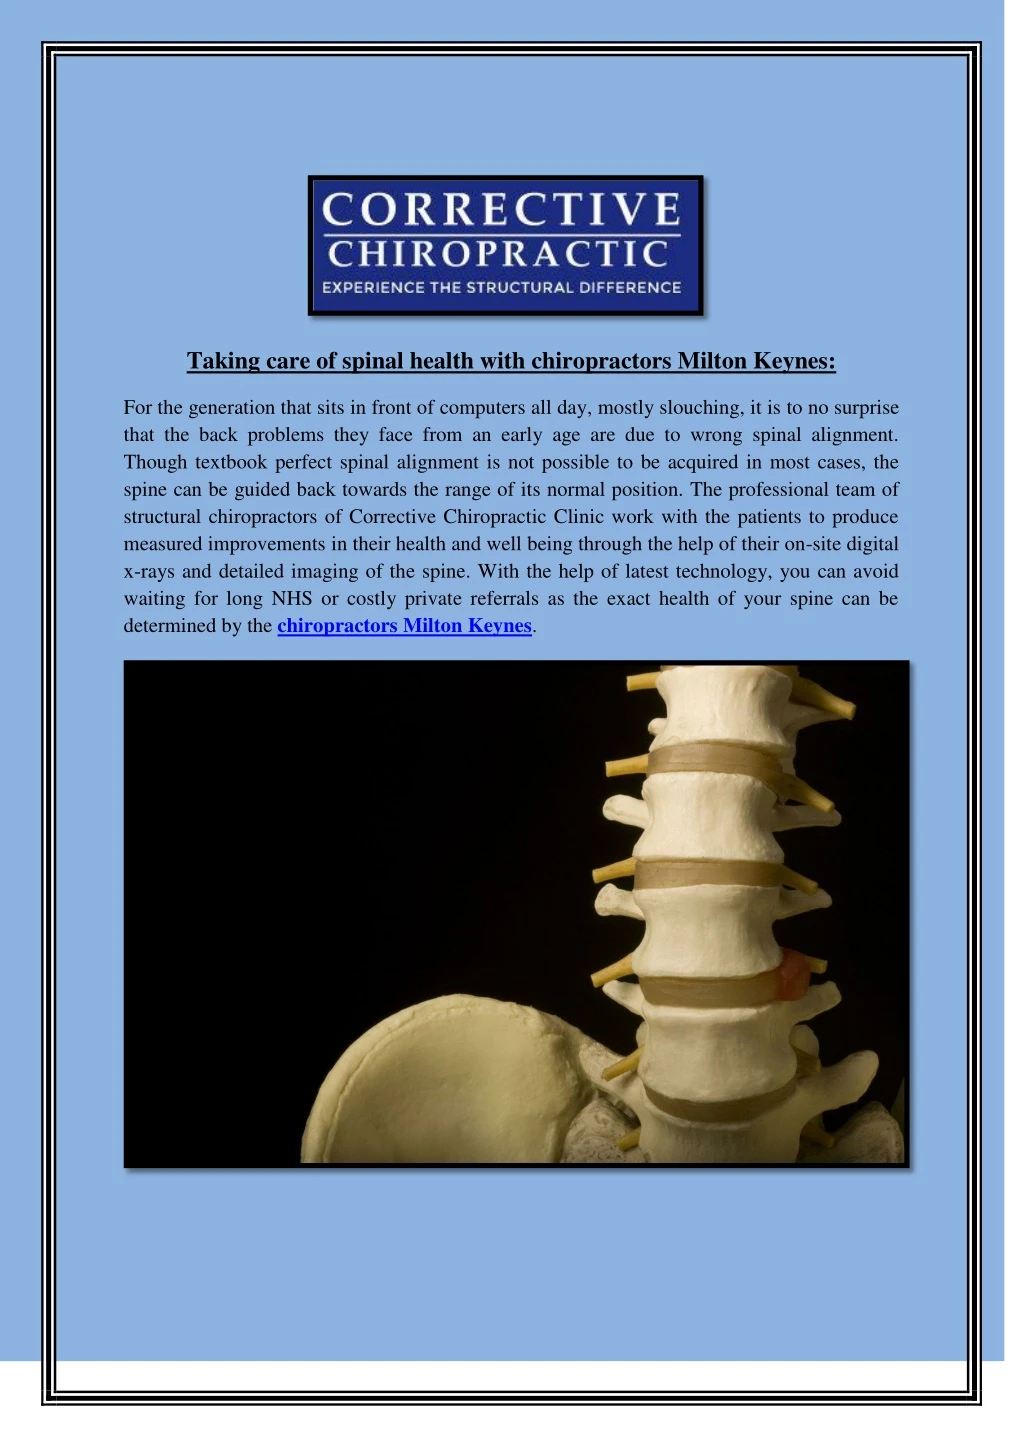 taking care of spinal health with chiropractors